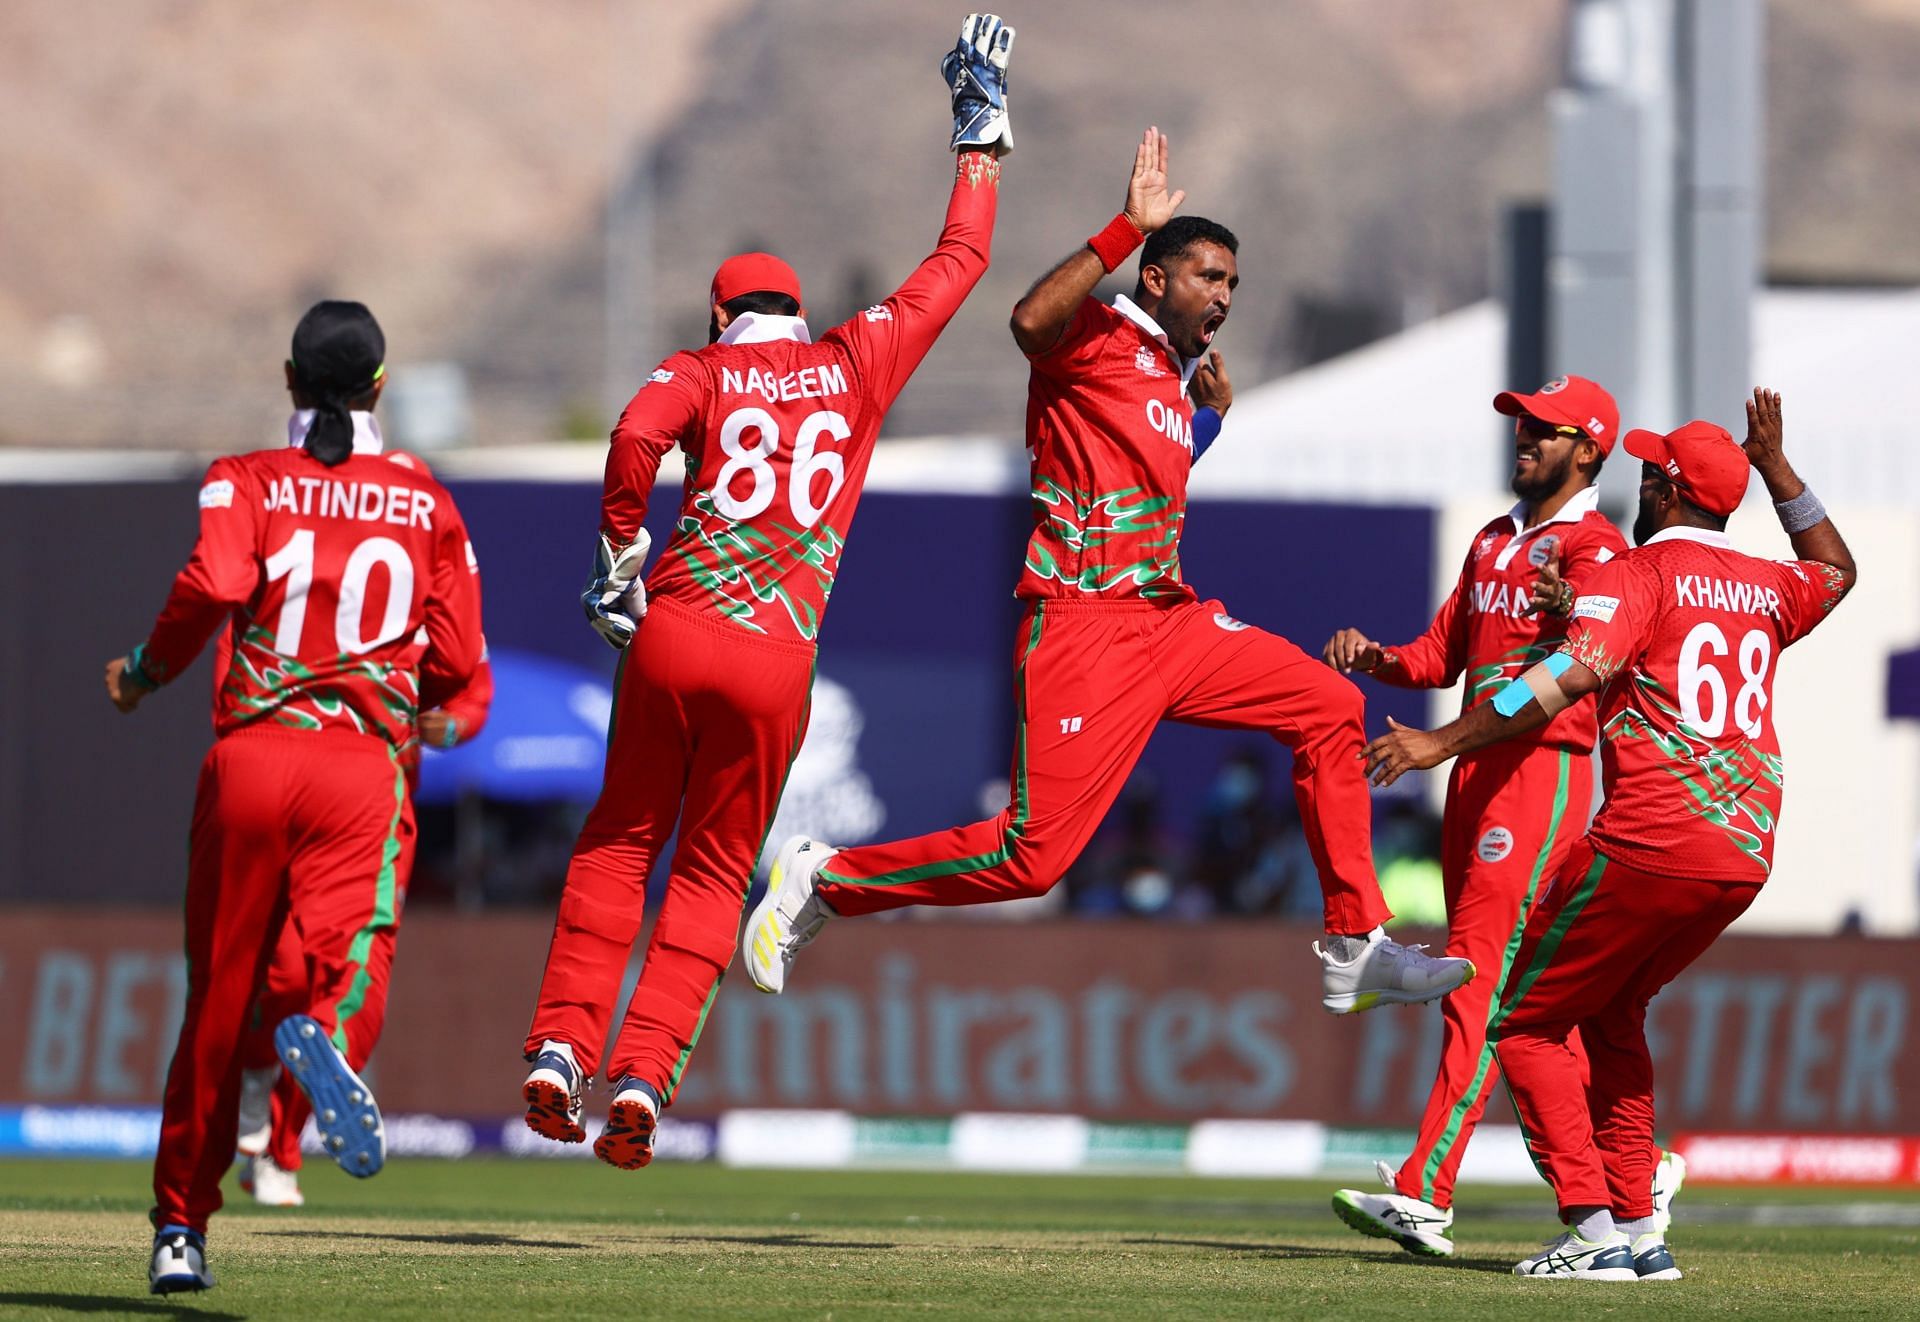 Oman&#039;s bowlers kept Papua New Guinea down to 129/9 in their 20 overs (Image Courtesy: ICC/Twitter)